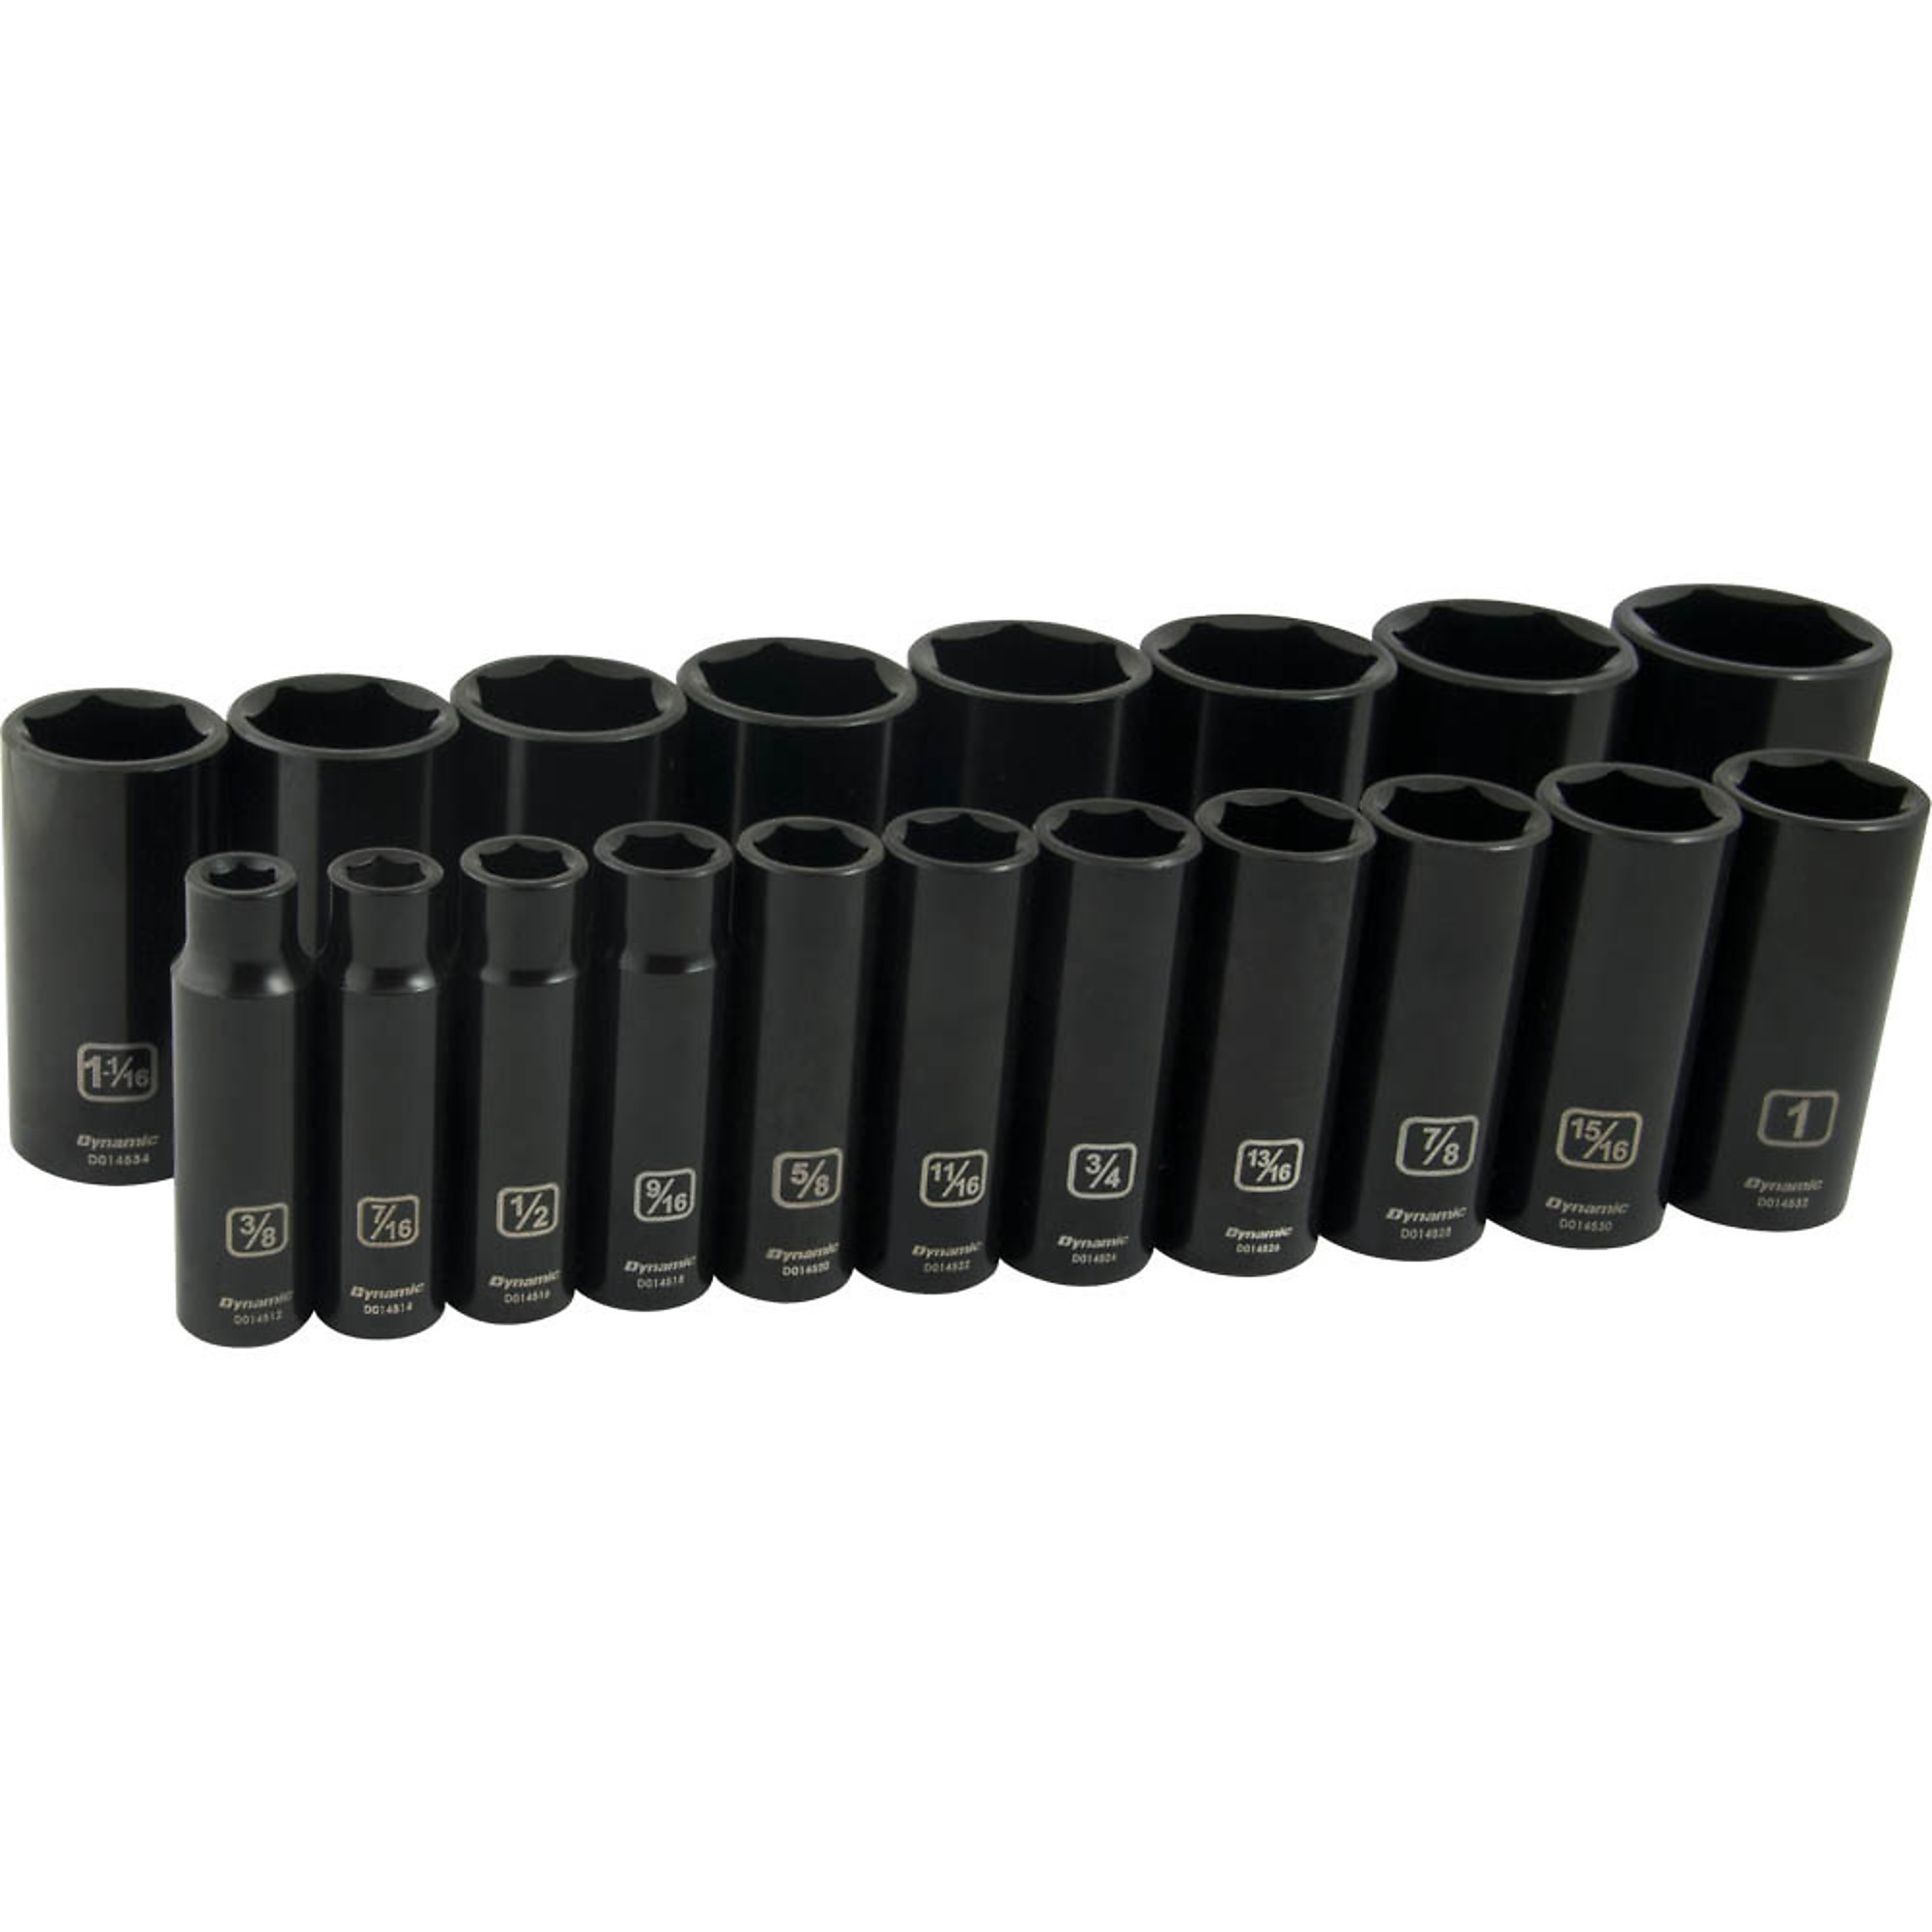 Dynamic Tools, 1/2Inch 6 Point Deep SAE Impact Socket Set, Measurement Standard Standard (SAE), Pieces (qty.) 19 Socket Set Type 1/2Inch Drive Sets,